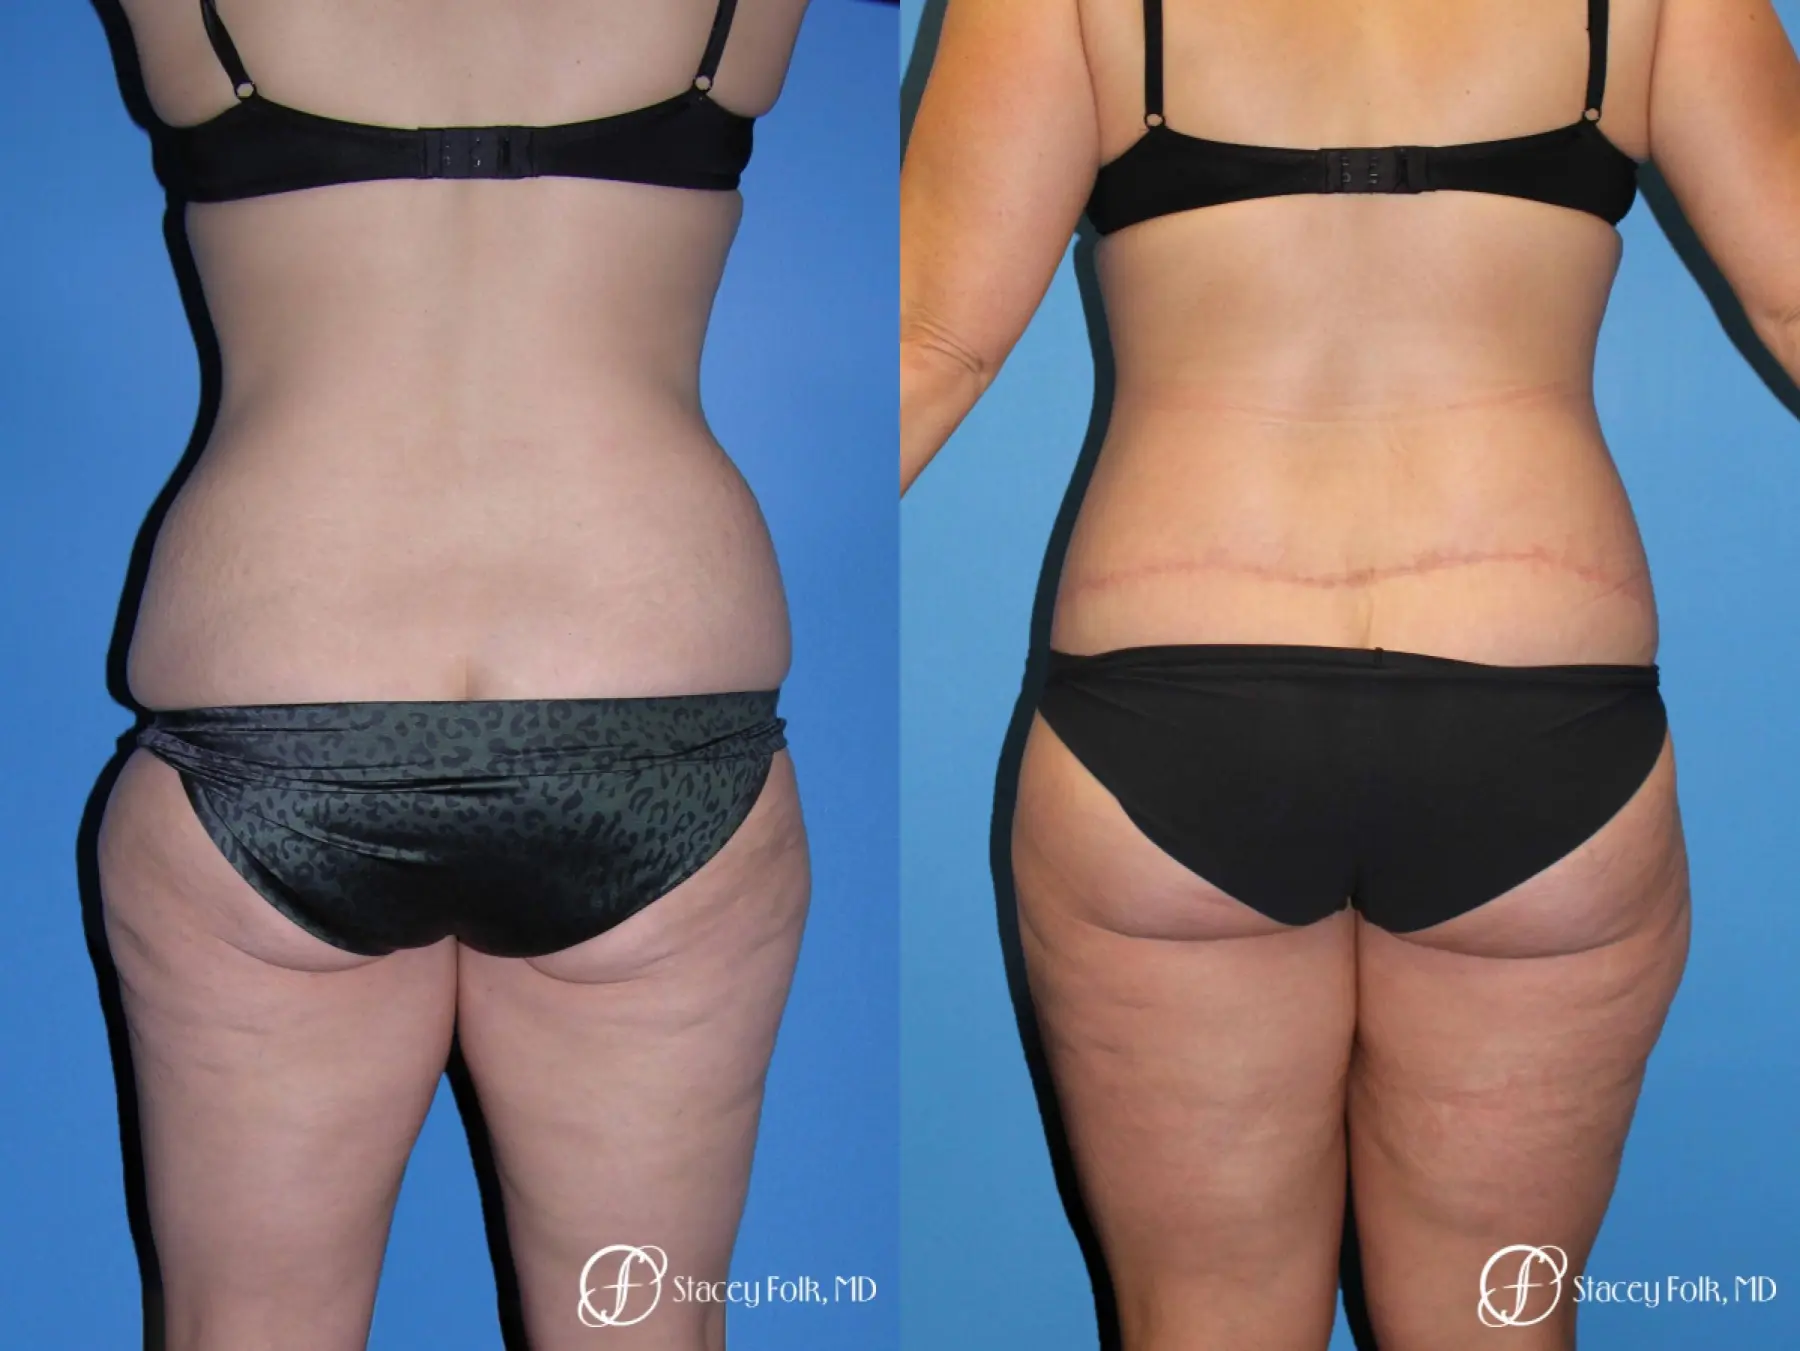 Body Lift Before & After Gallery: Patient 6